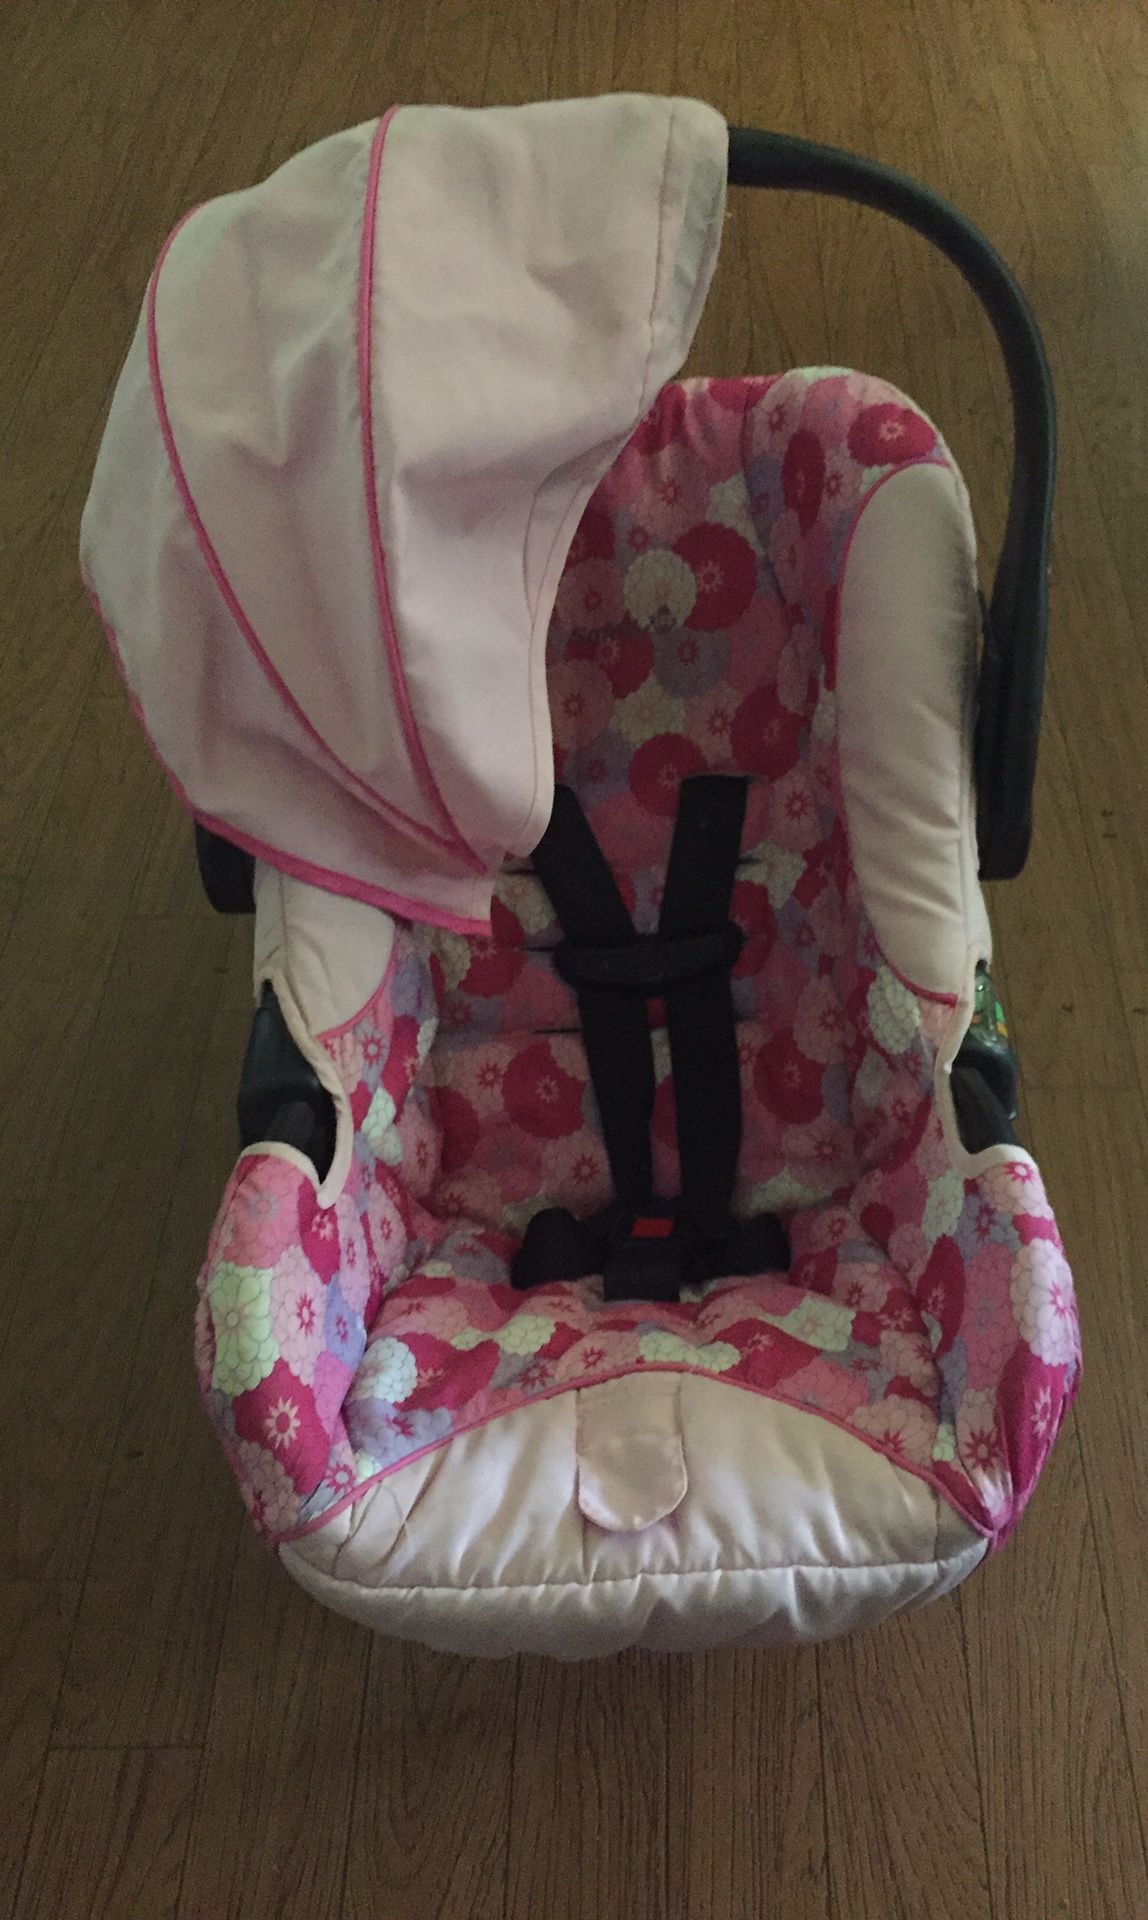 Infant car seat. With base